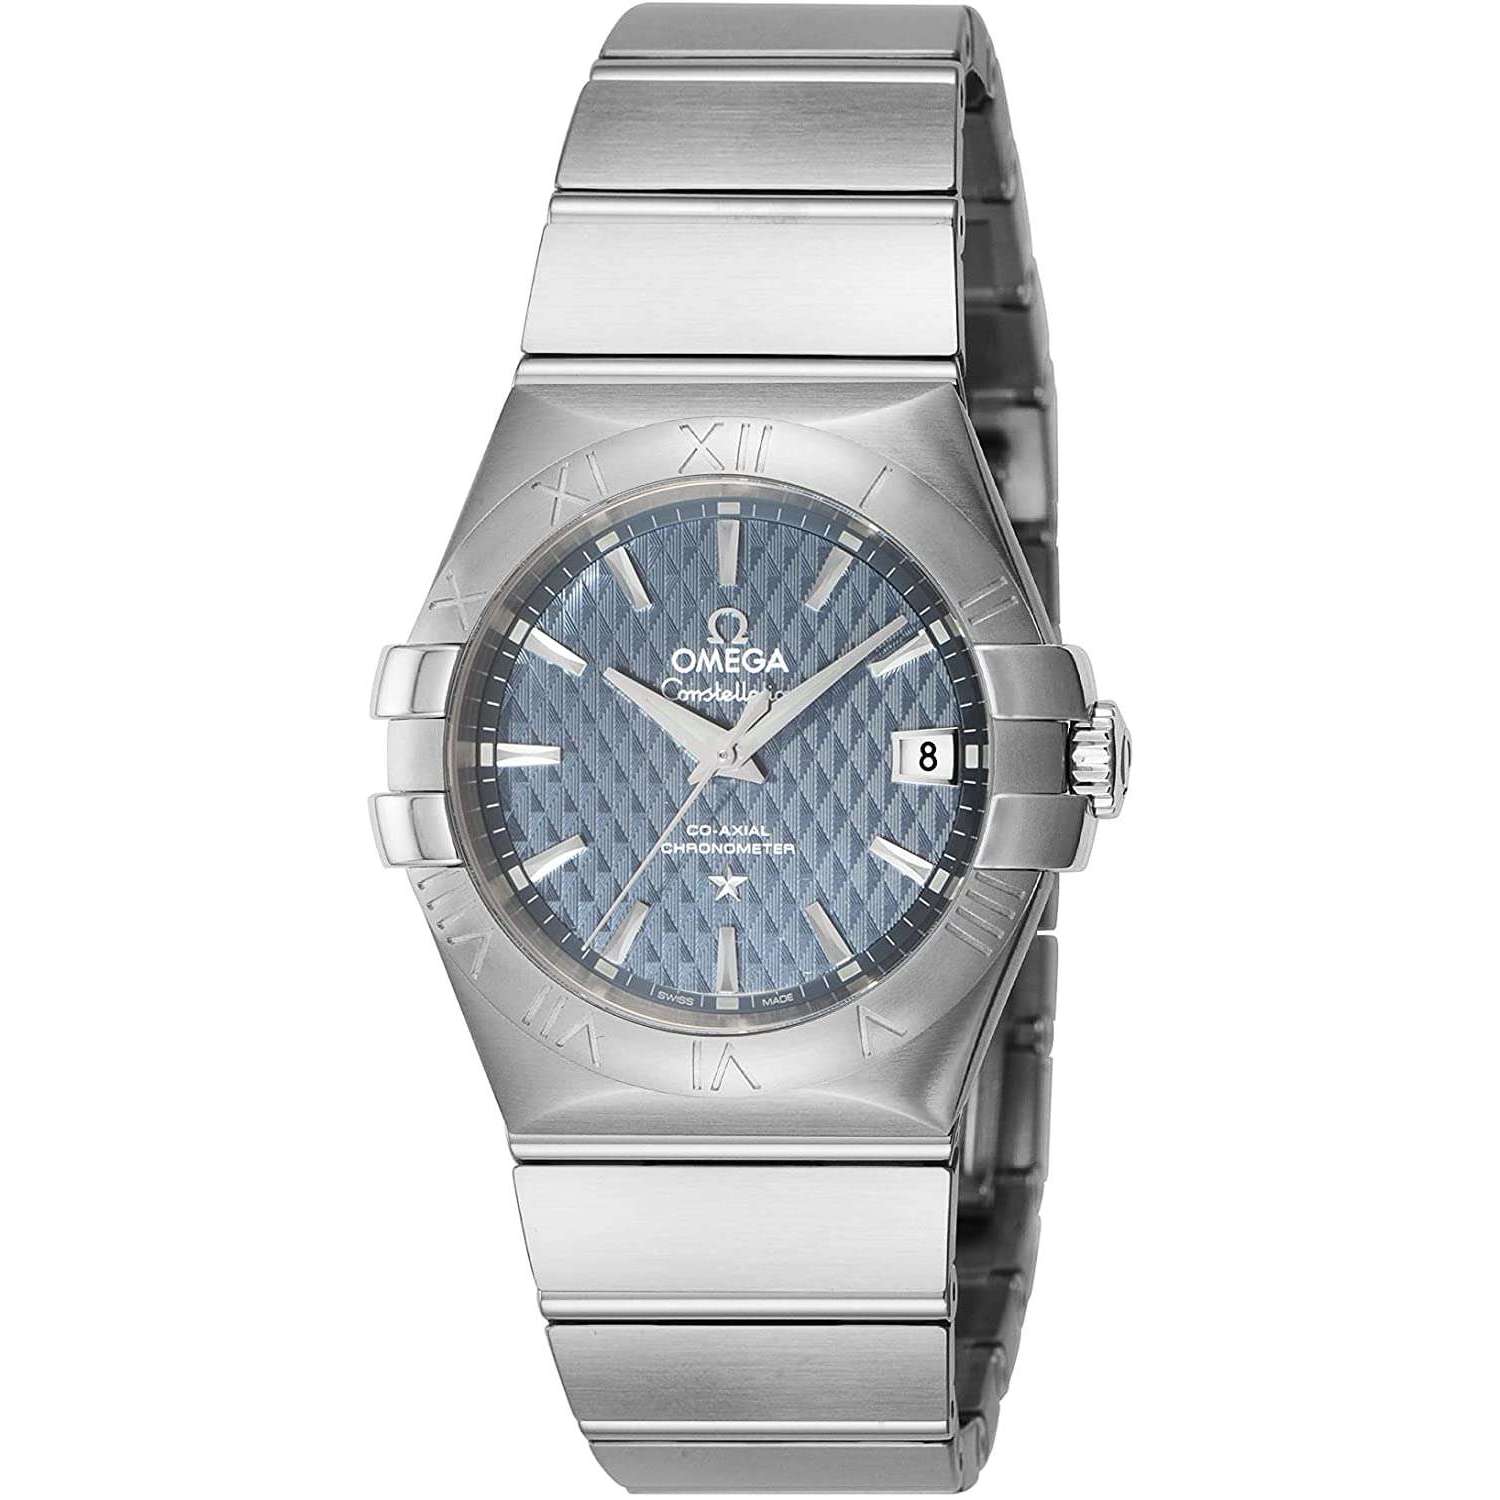 OMEGA CONSTELLATION CO-AXIAL CHRONOMETER 37 MM MEN WATCH 123.10.35.20.03.002 - ROOK JAPAN